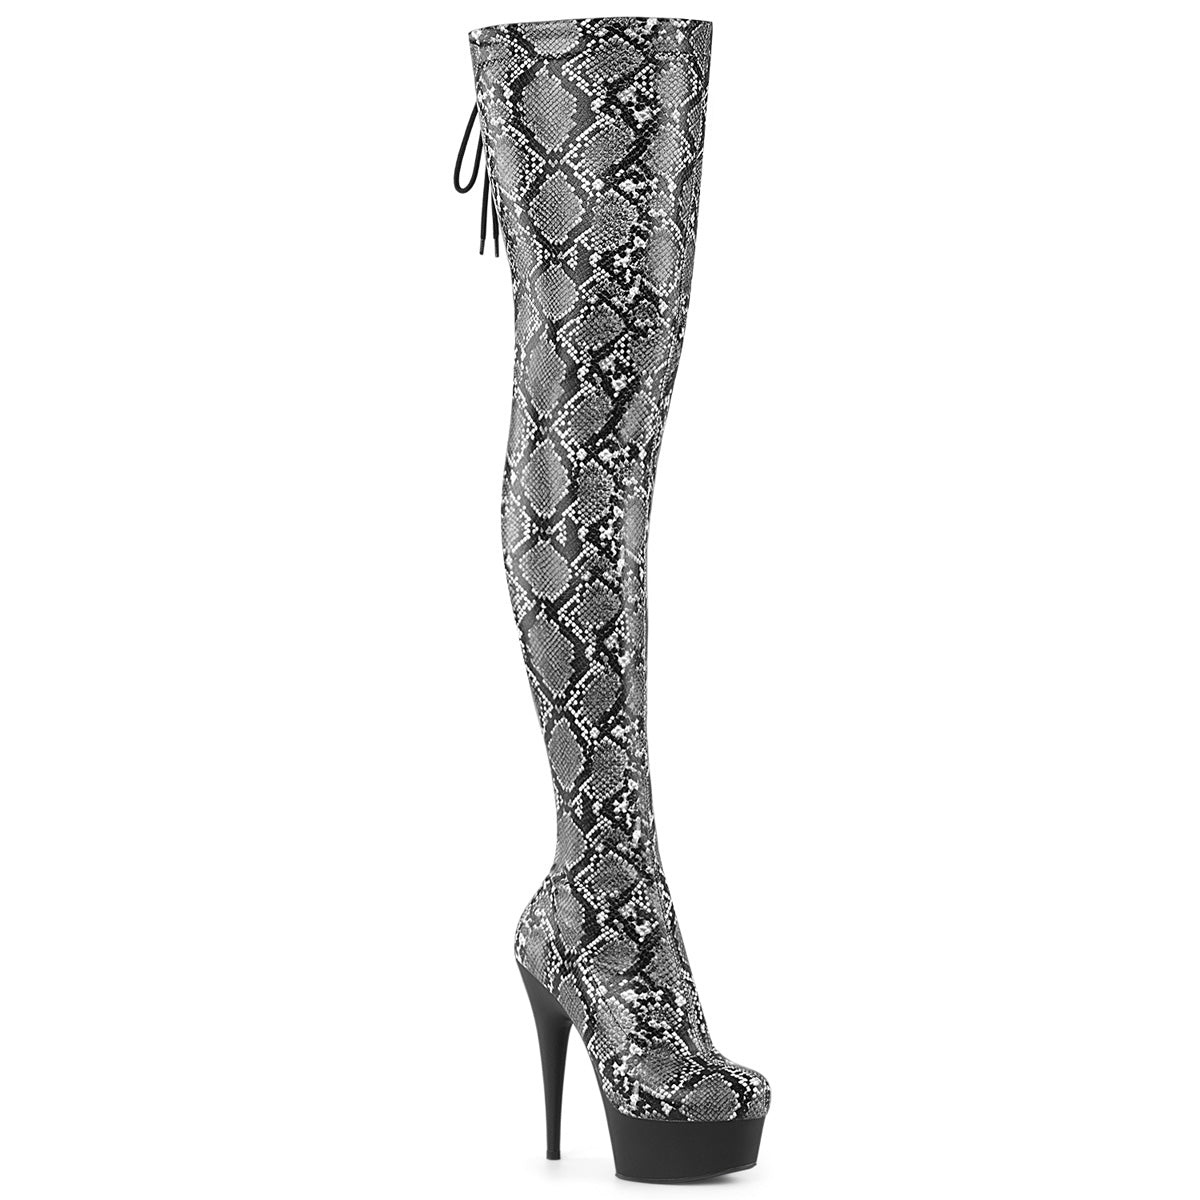 DELIGHT-3008SP-BT Snake Stretch Print Pull-On Thigh Boot Black & Grey Multi view 1